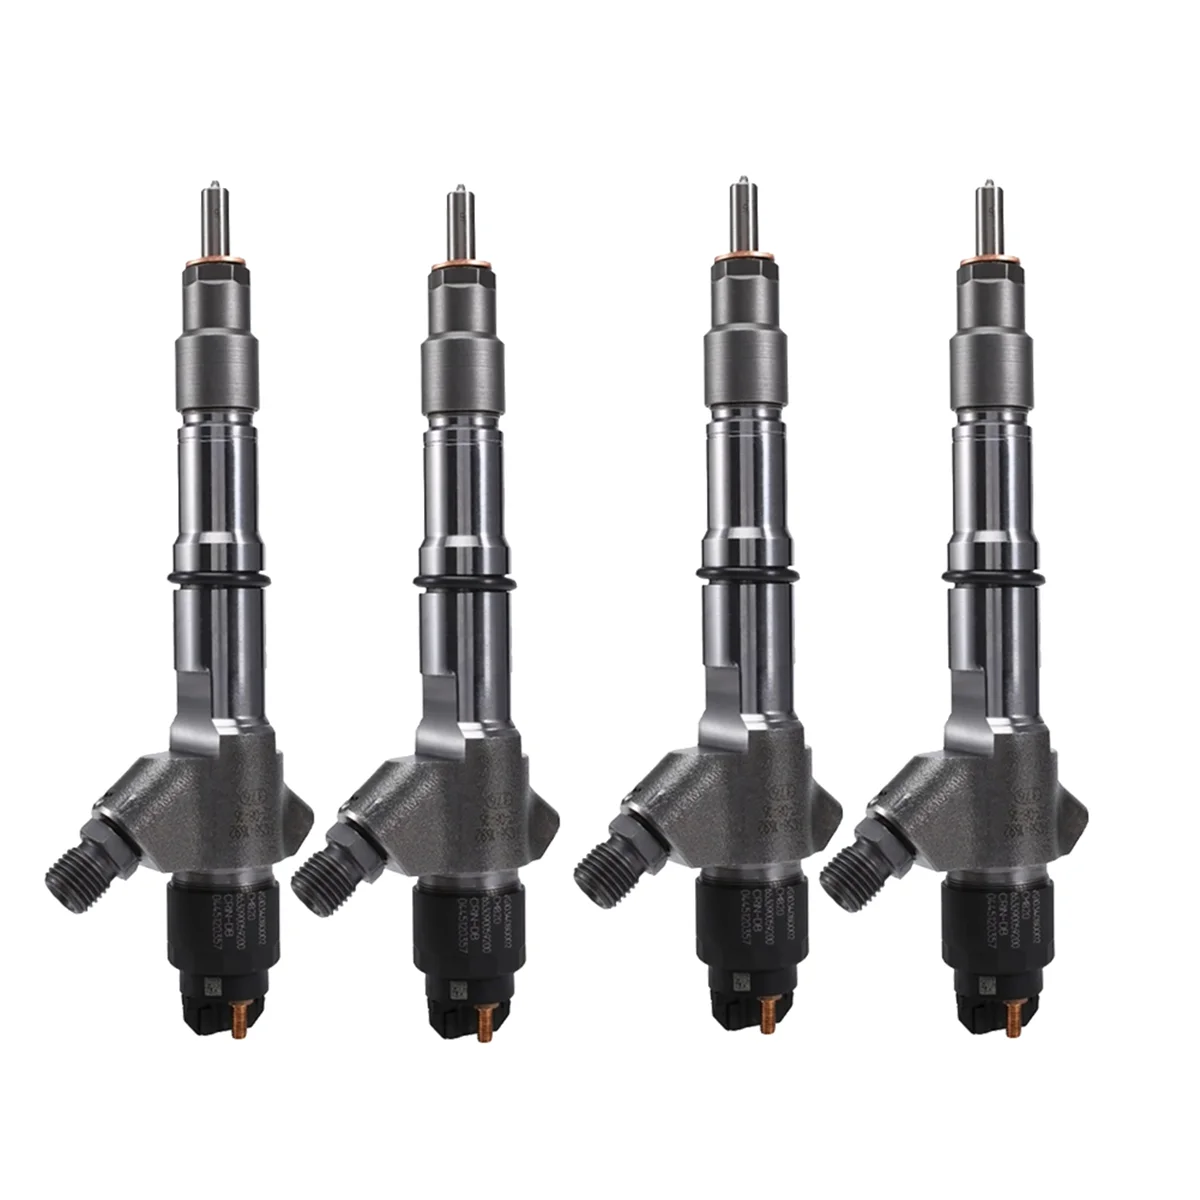 

4PCS 0445120357 New Common Rail Diesel Fuel Injector Nozzle for WEICAI WD615 Sino Truck HOWO Engine